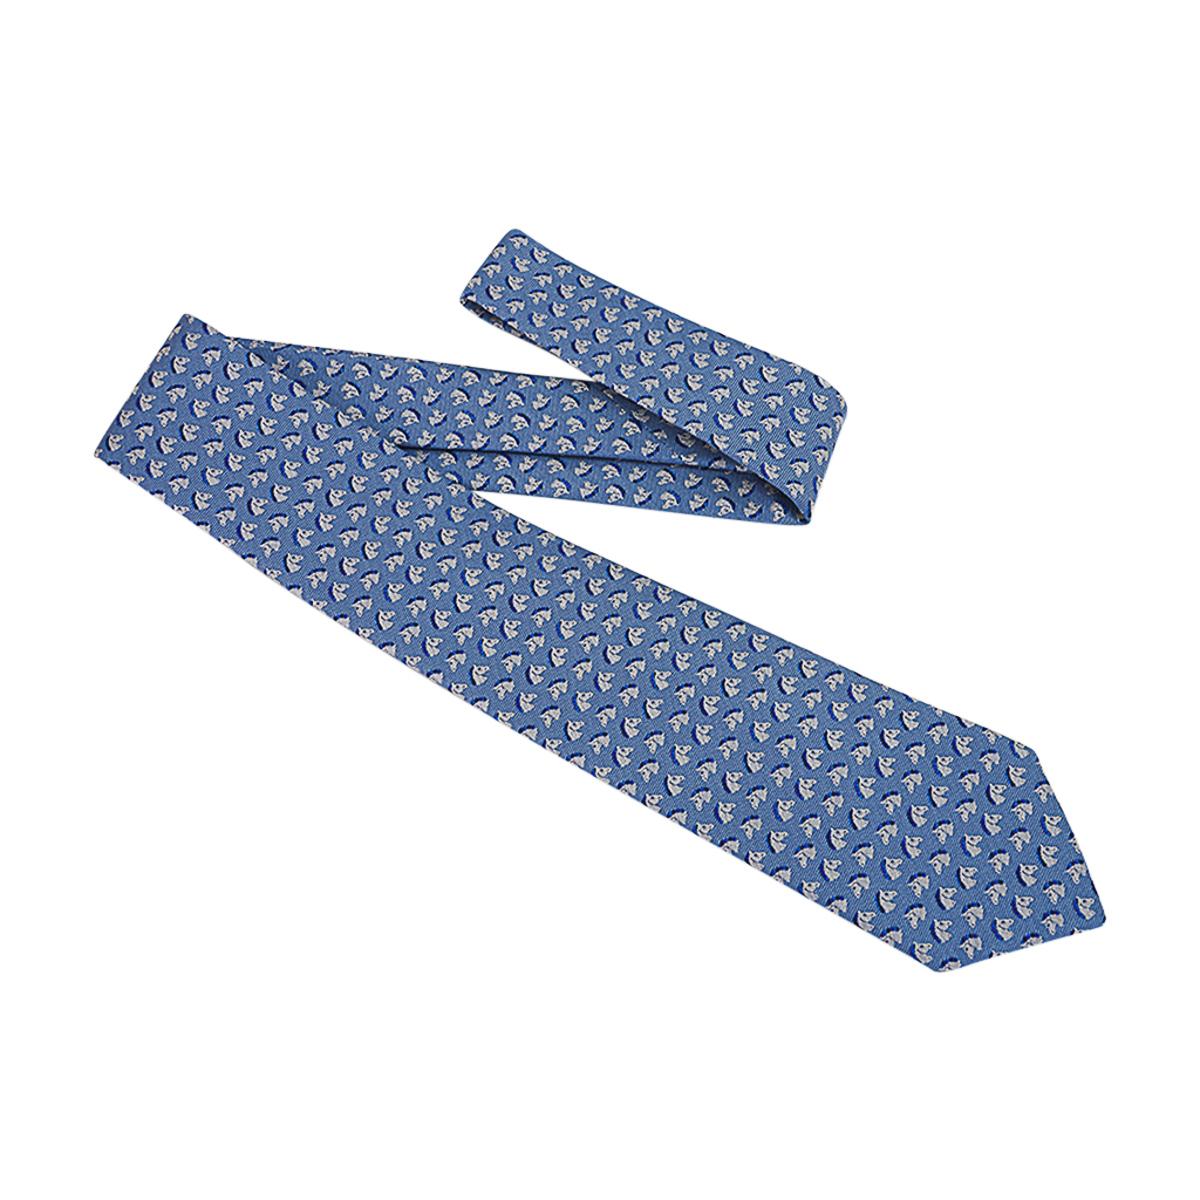 Hermes Cheval Rebelle Tie 7 Ciel Blanc and Marine Heavy Silk Twill For Sale 3